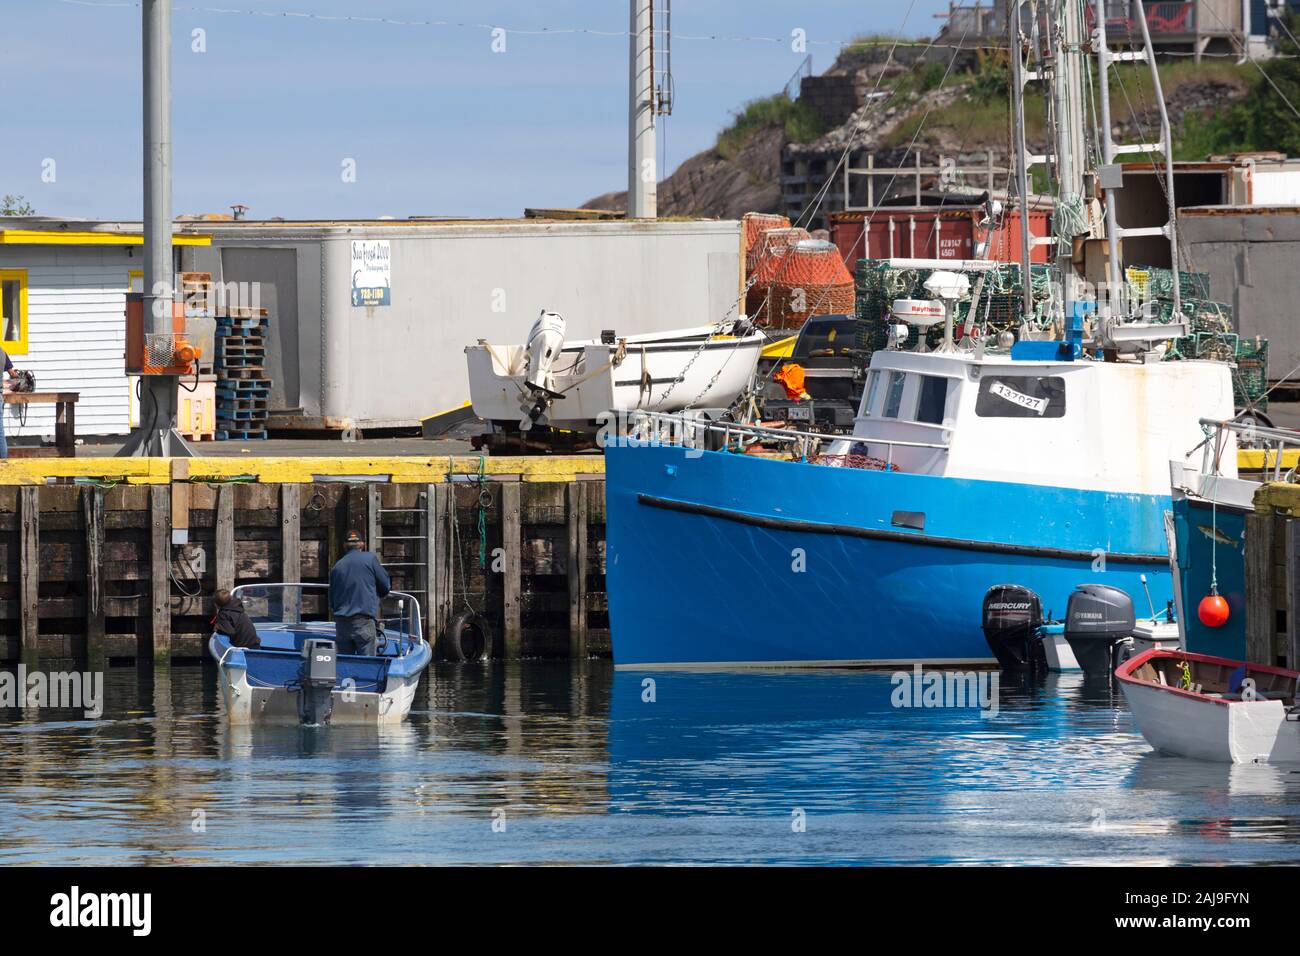 Fishing boat moored at St John's, Newfoundland and Labrador, Canada. The fishing industry was long a major source of local employment. Stock Photo